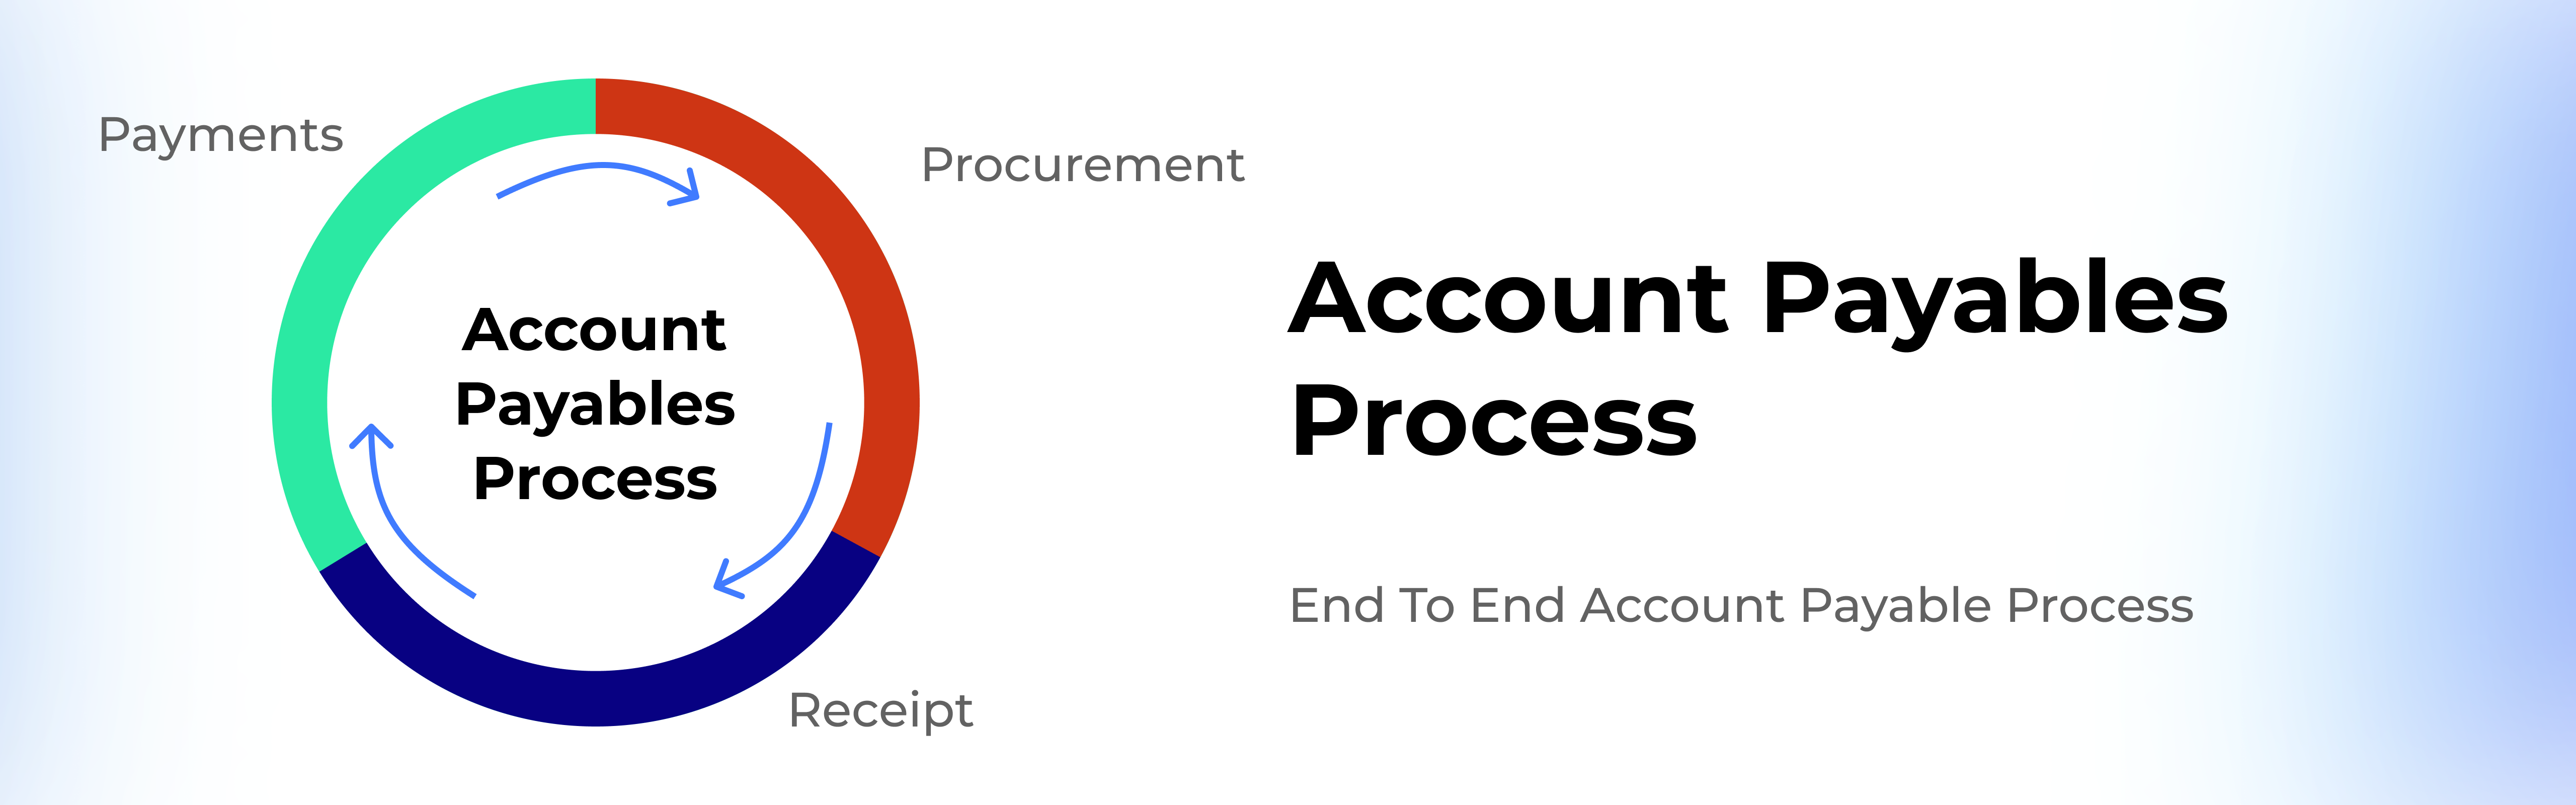 account-payable-process-end-to-end-process-of-ap